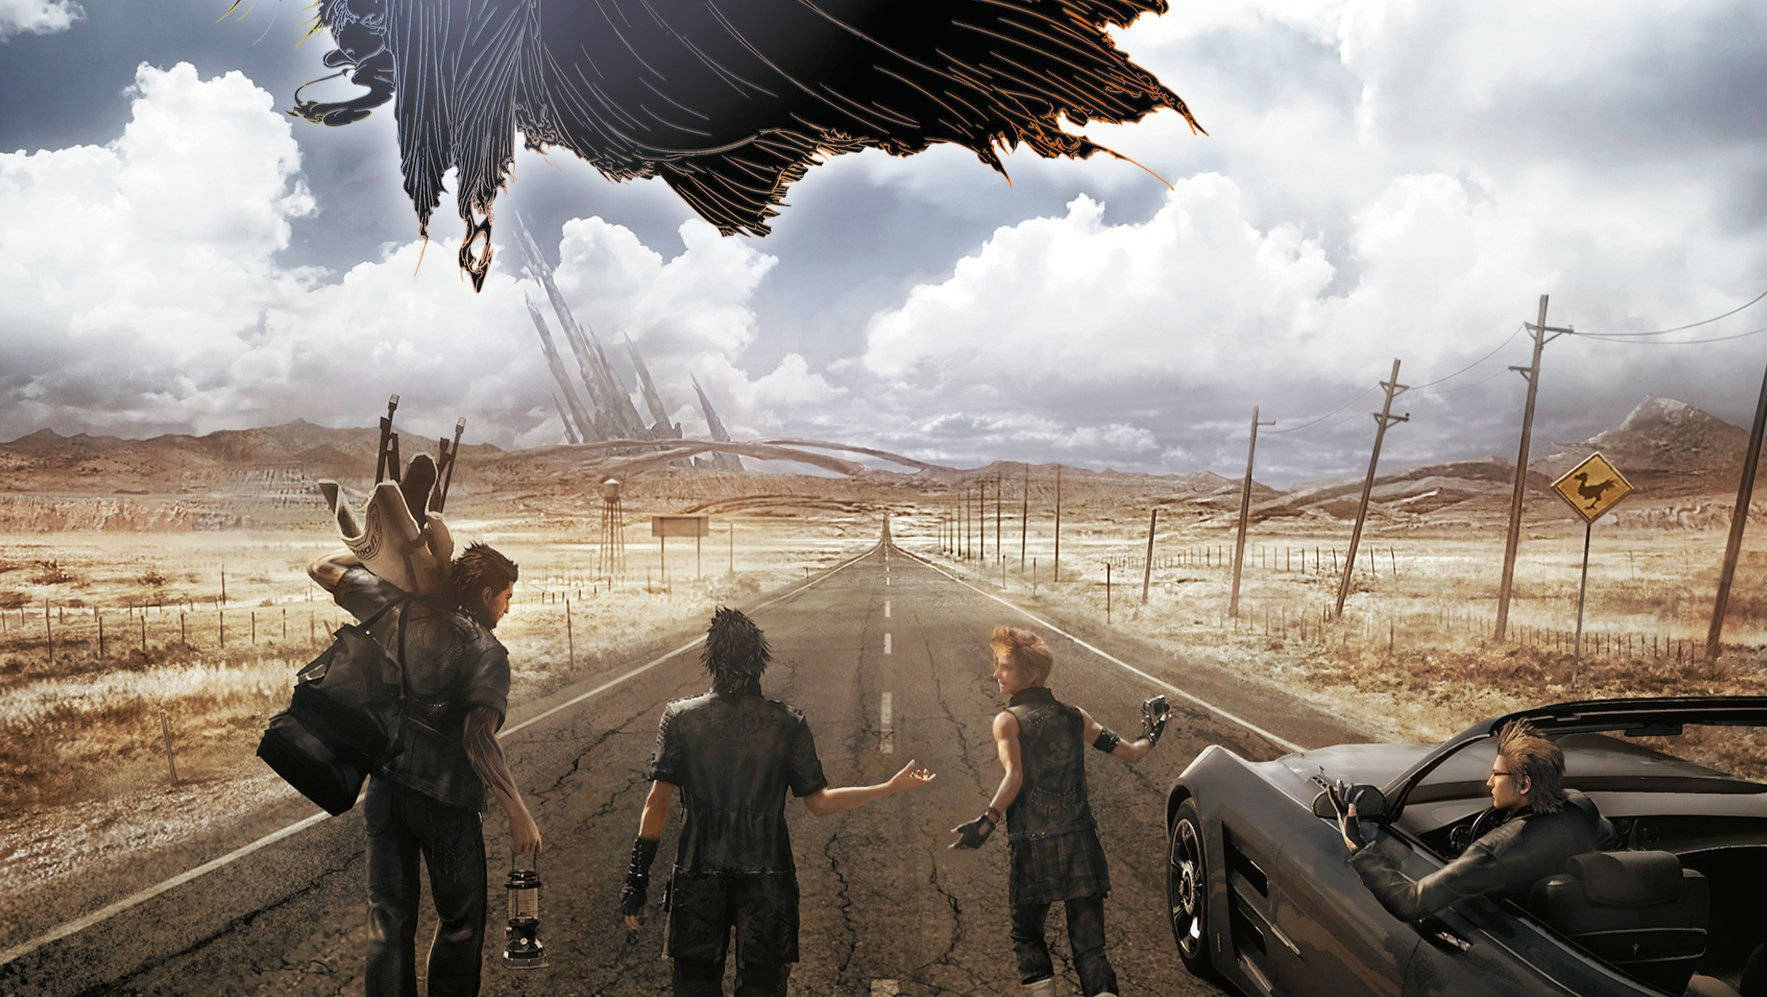 Final Fantasy Xv Noctis And Friends